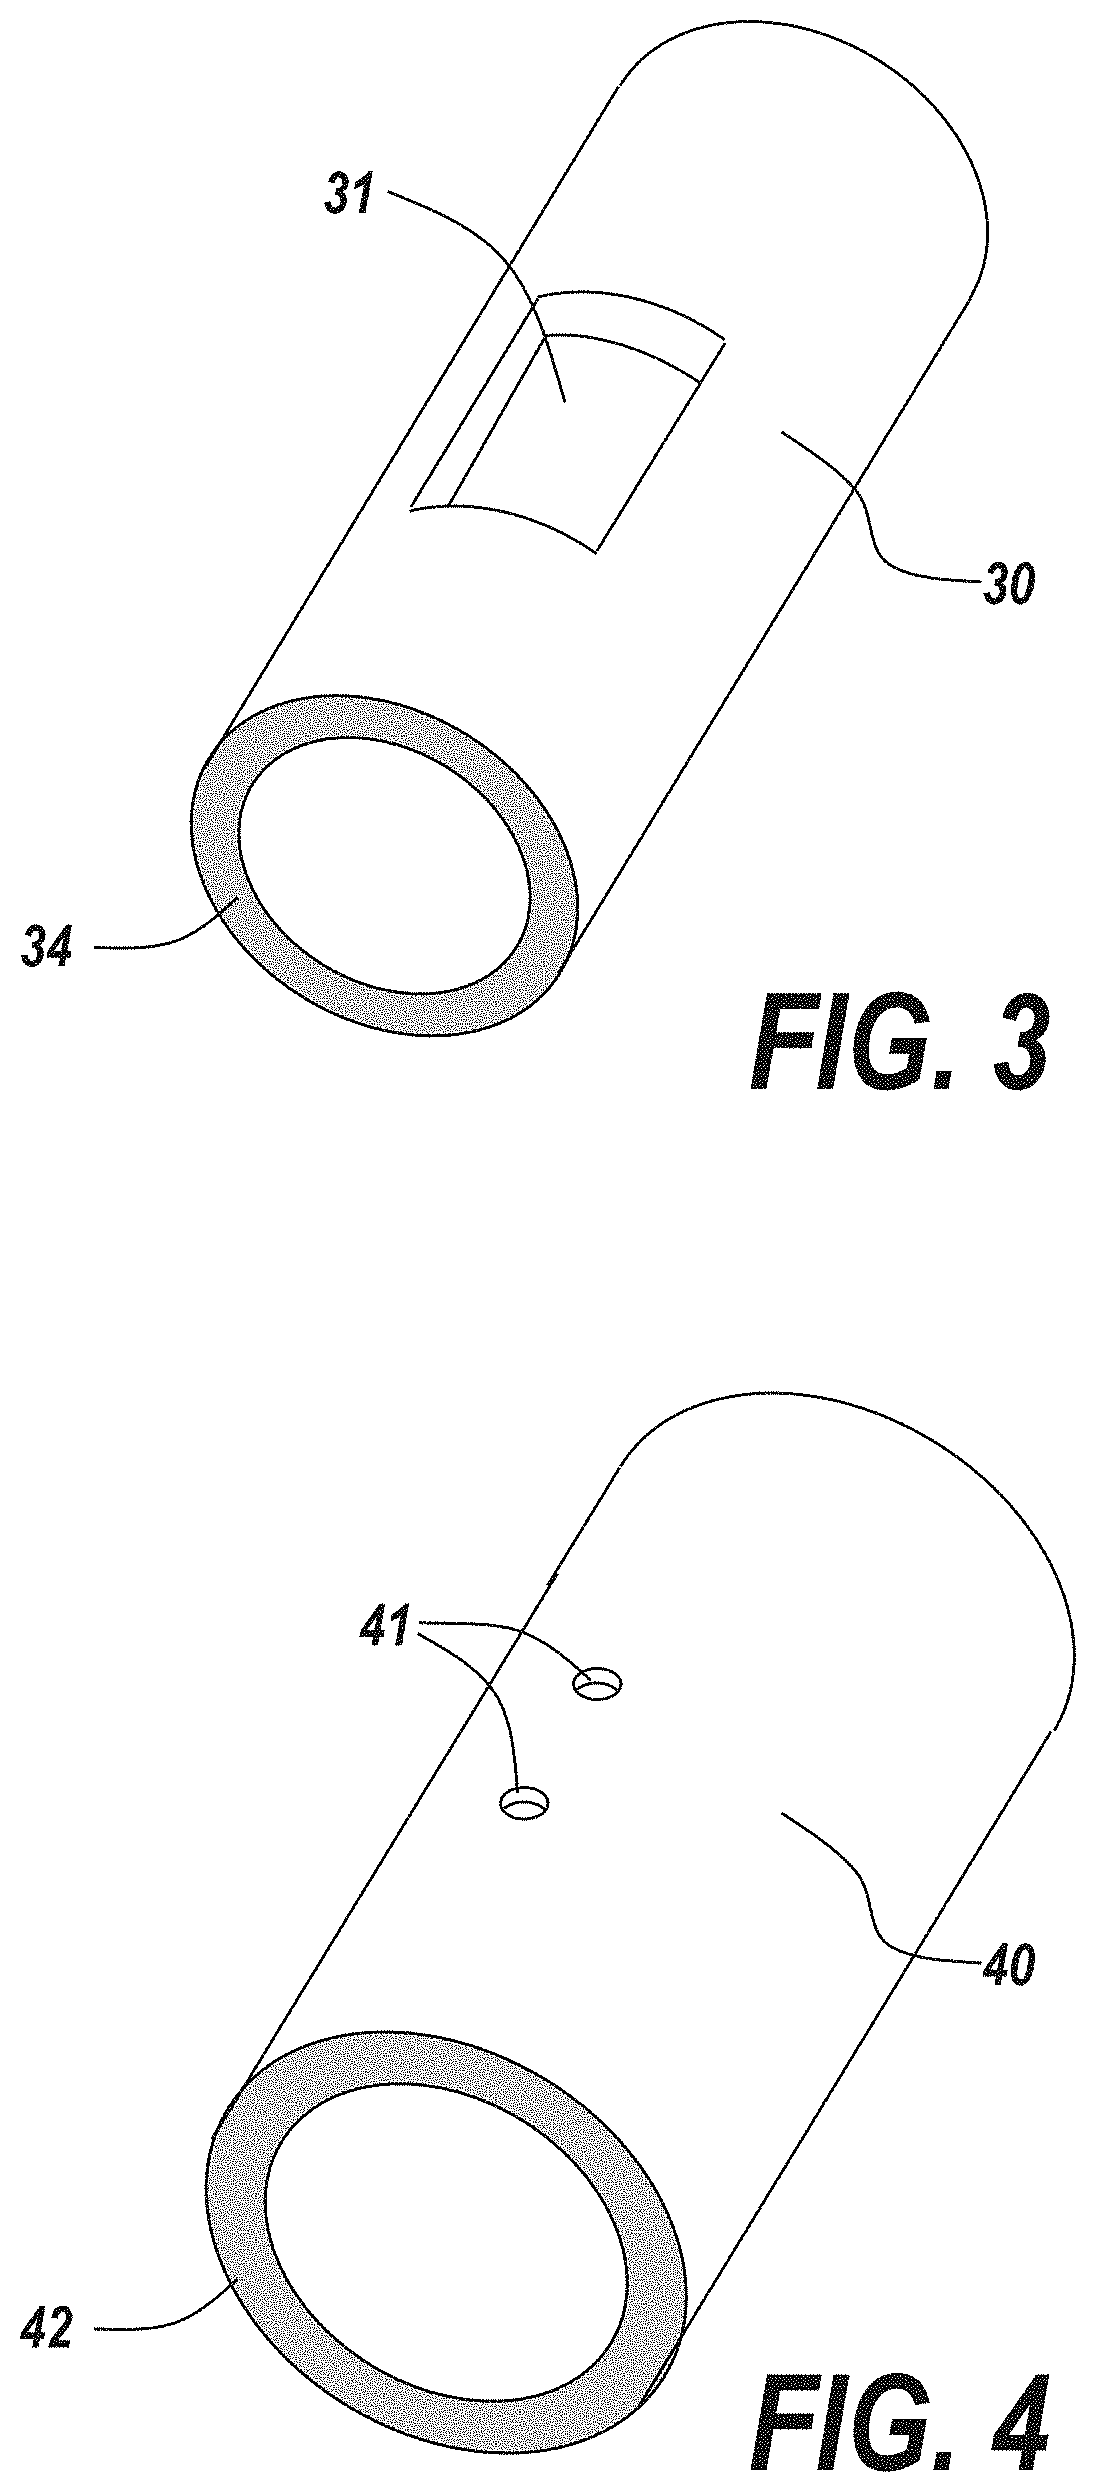 Modular fluid spray nozzles and related systems and methods